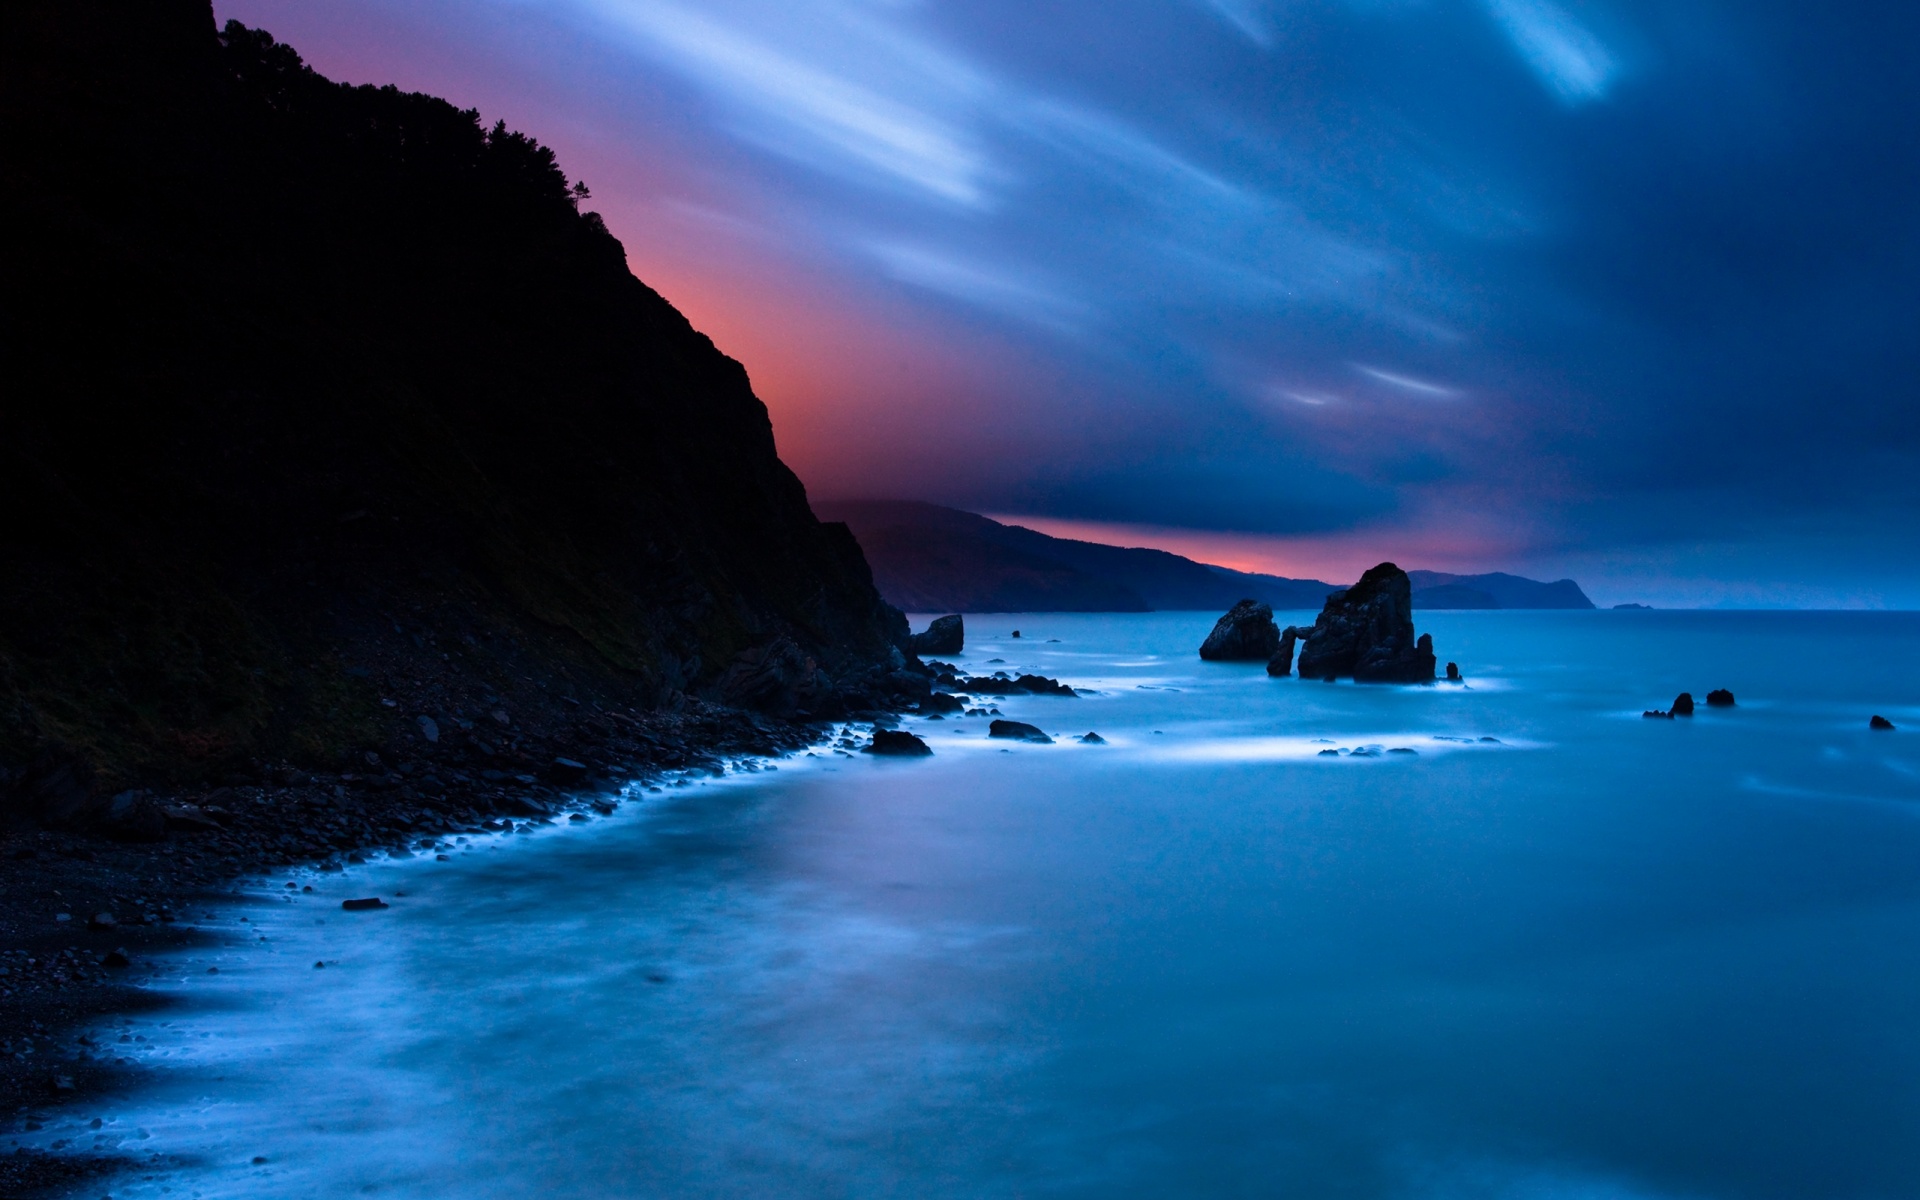 Rocky Shore HD Wallpapers For Windows 8.1 - Wallpapers Z